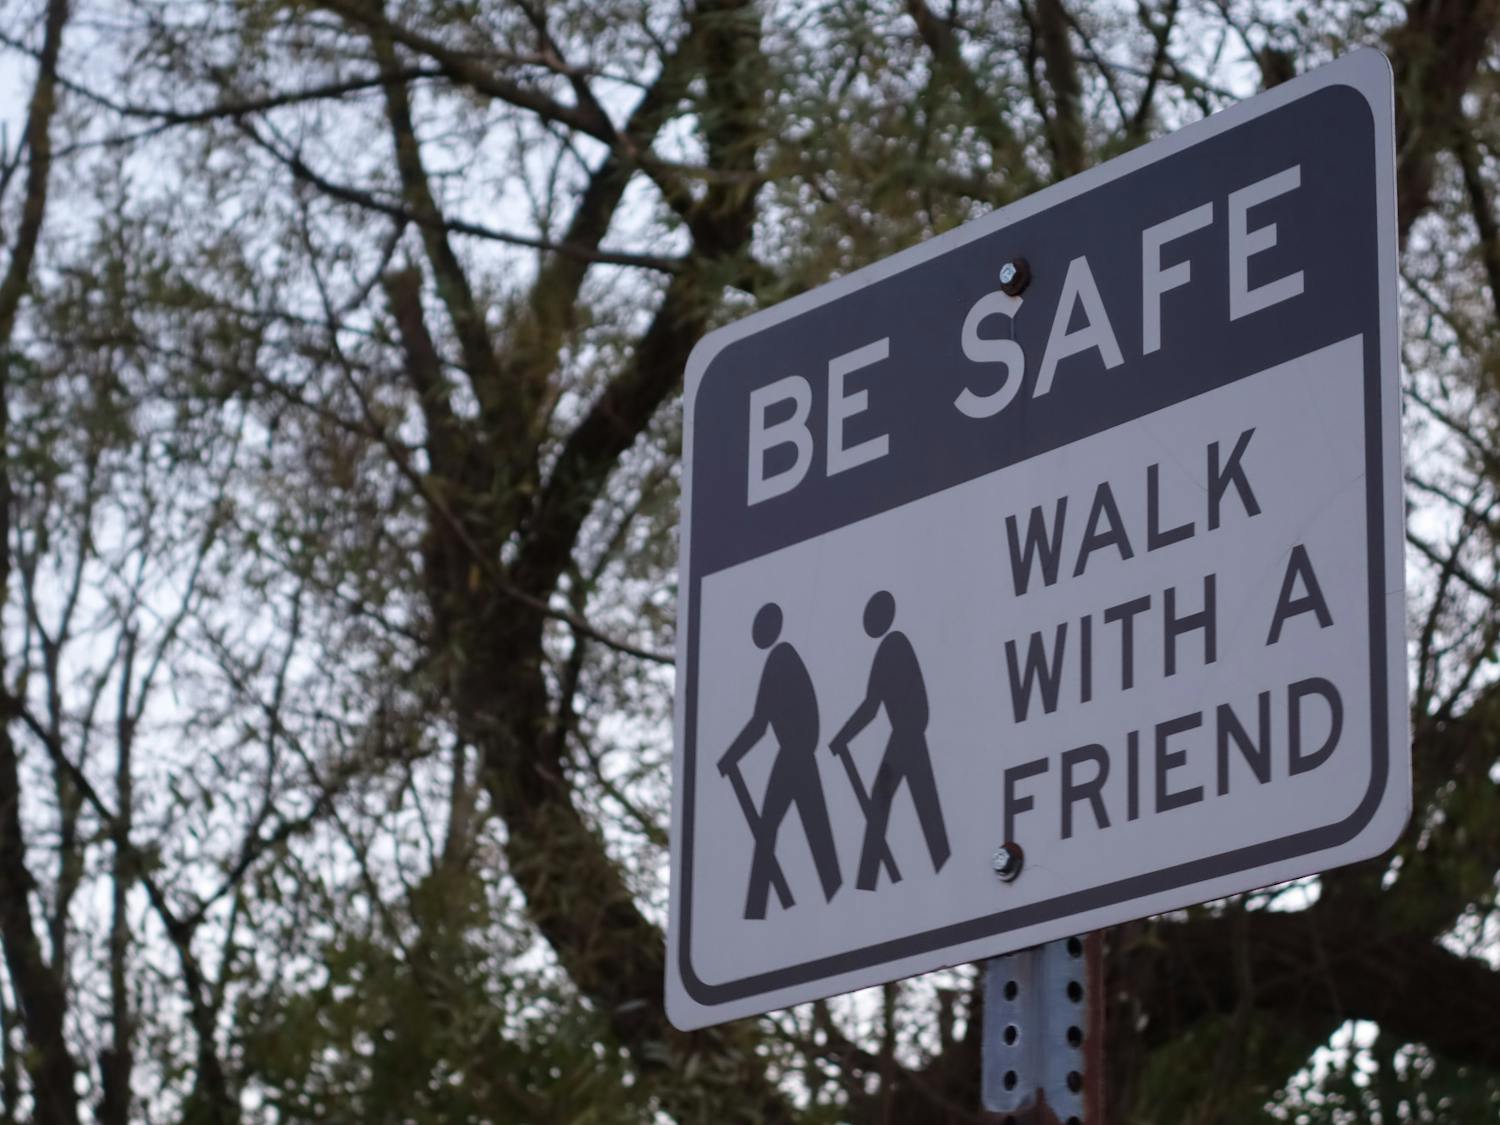 A sign advises walkers on the Ellicott creek trail to walk with a friend.